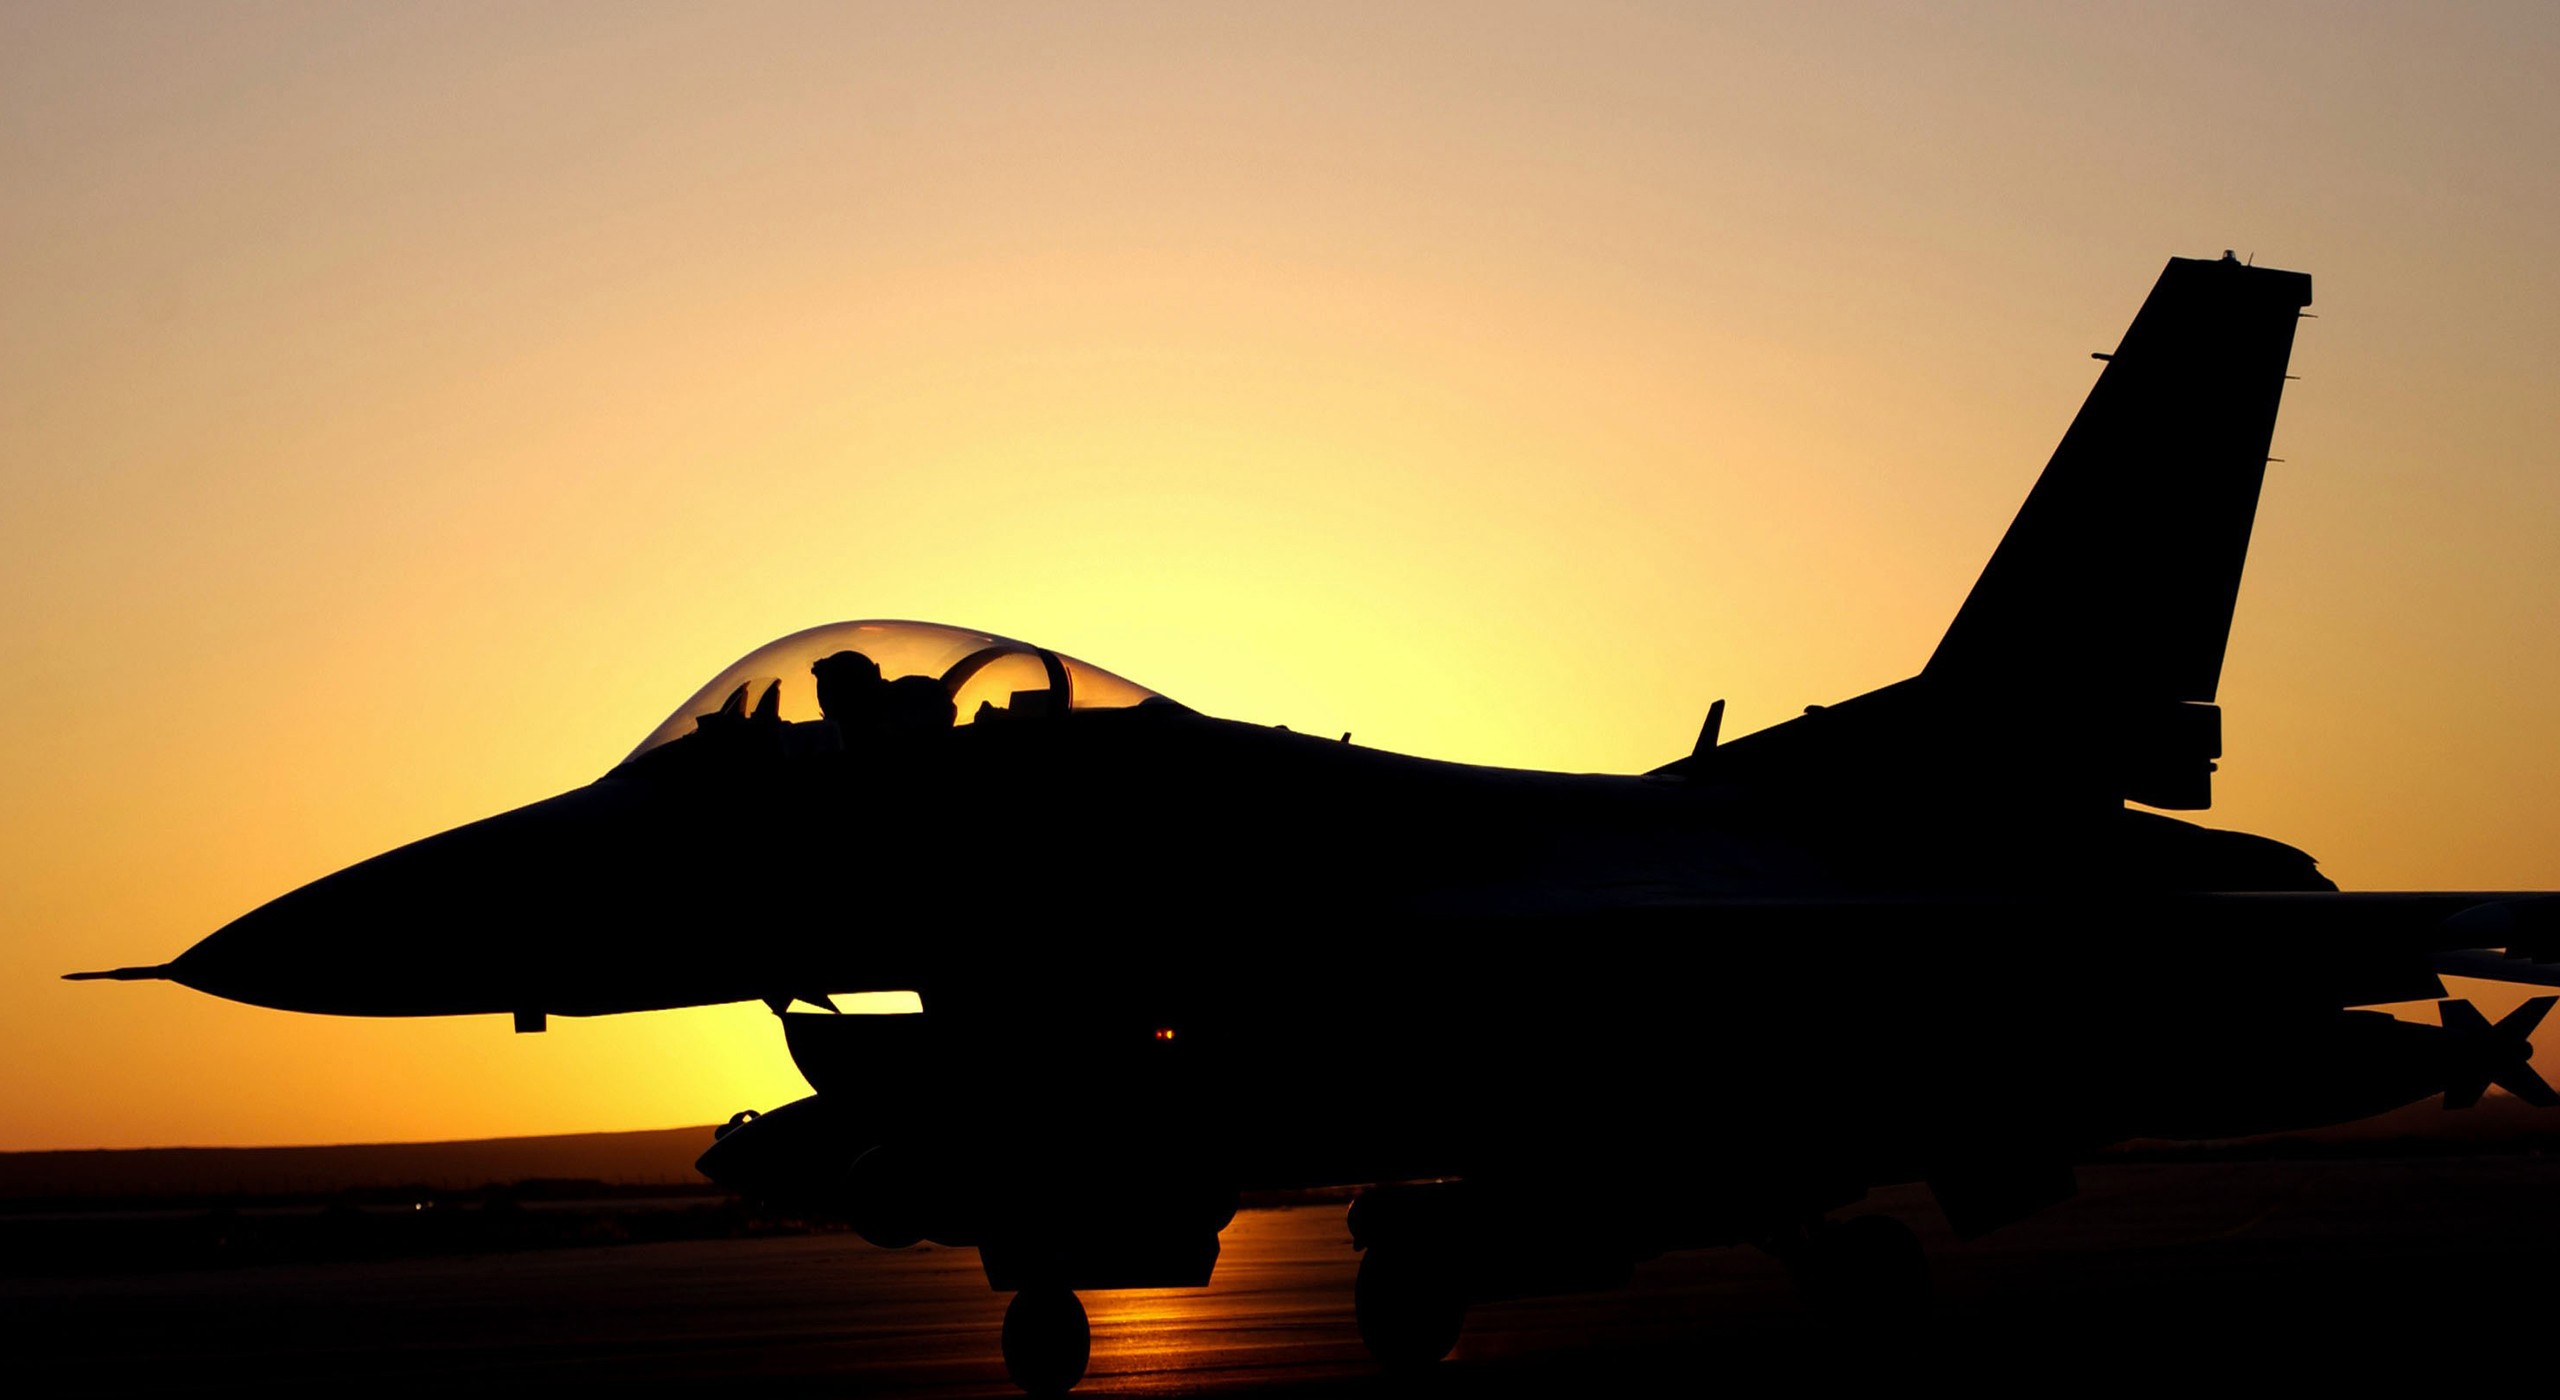 General 2560x1400 General Dynamics F-16 Fighting Falcon sunset aircraft military aircraft silhouette military vehicle American aircraft General Dynamics